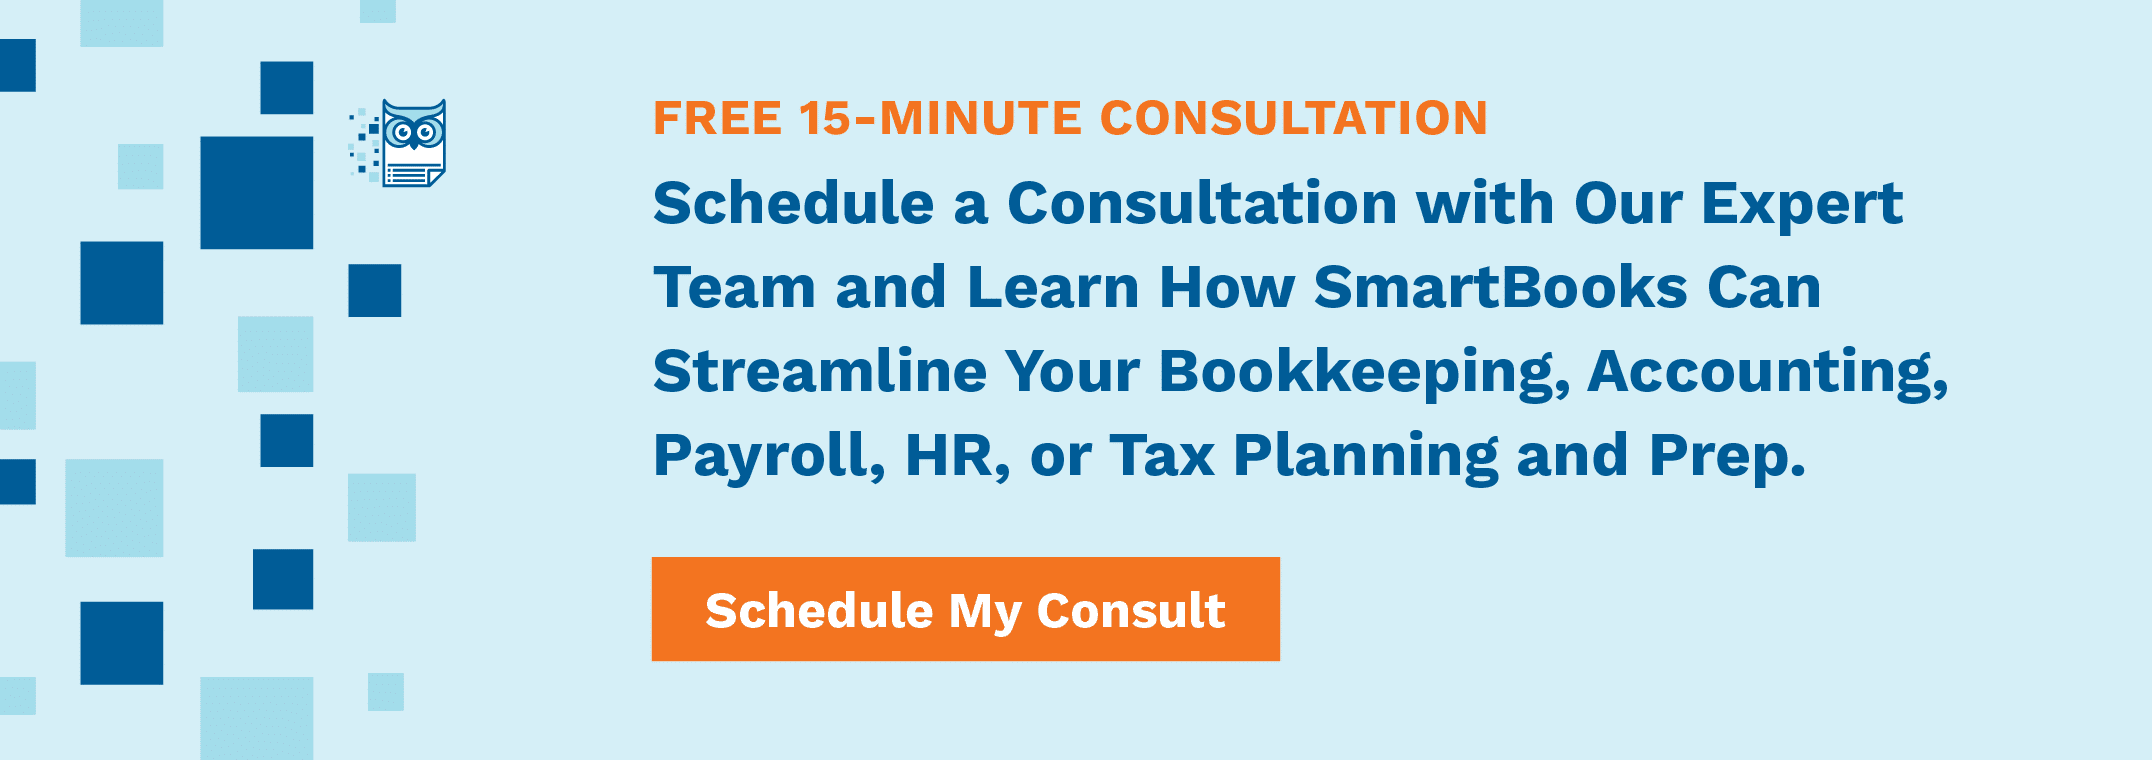 Schedule a consultation with SmartBooks' team and learn how we can streamline your bookkeeping, accounting, payroll, HR, or tax planning and prep